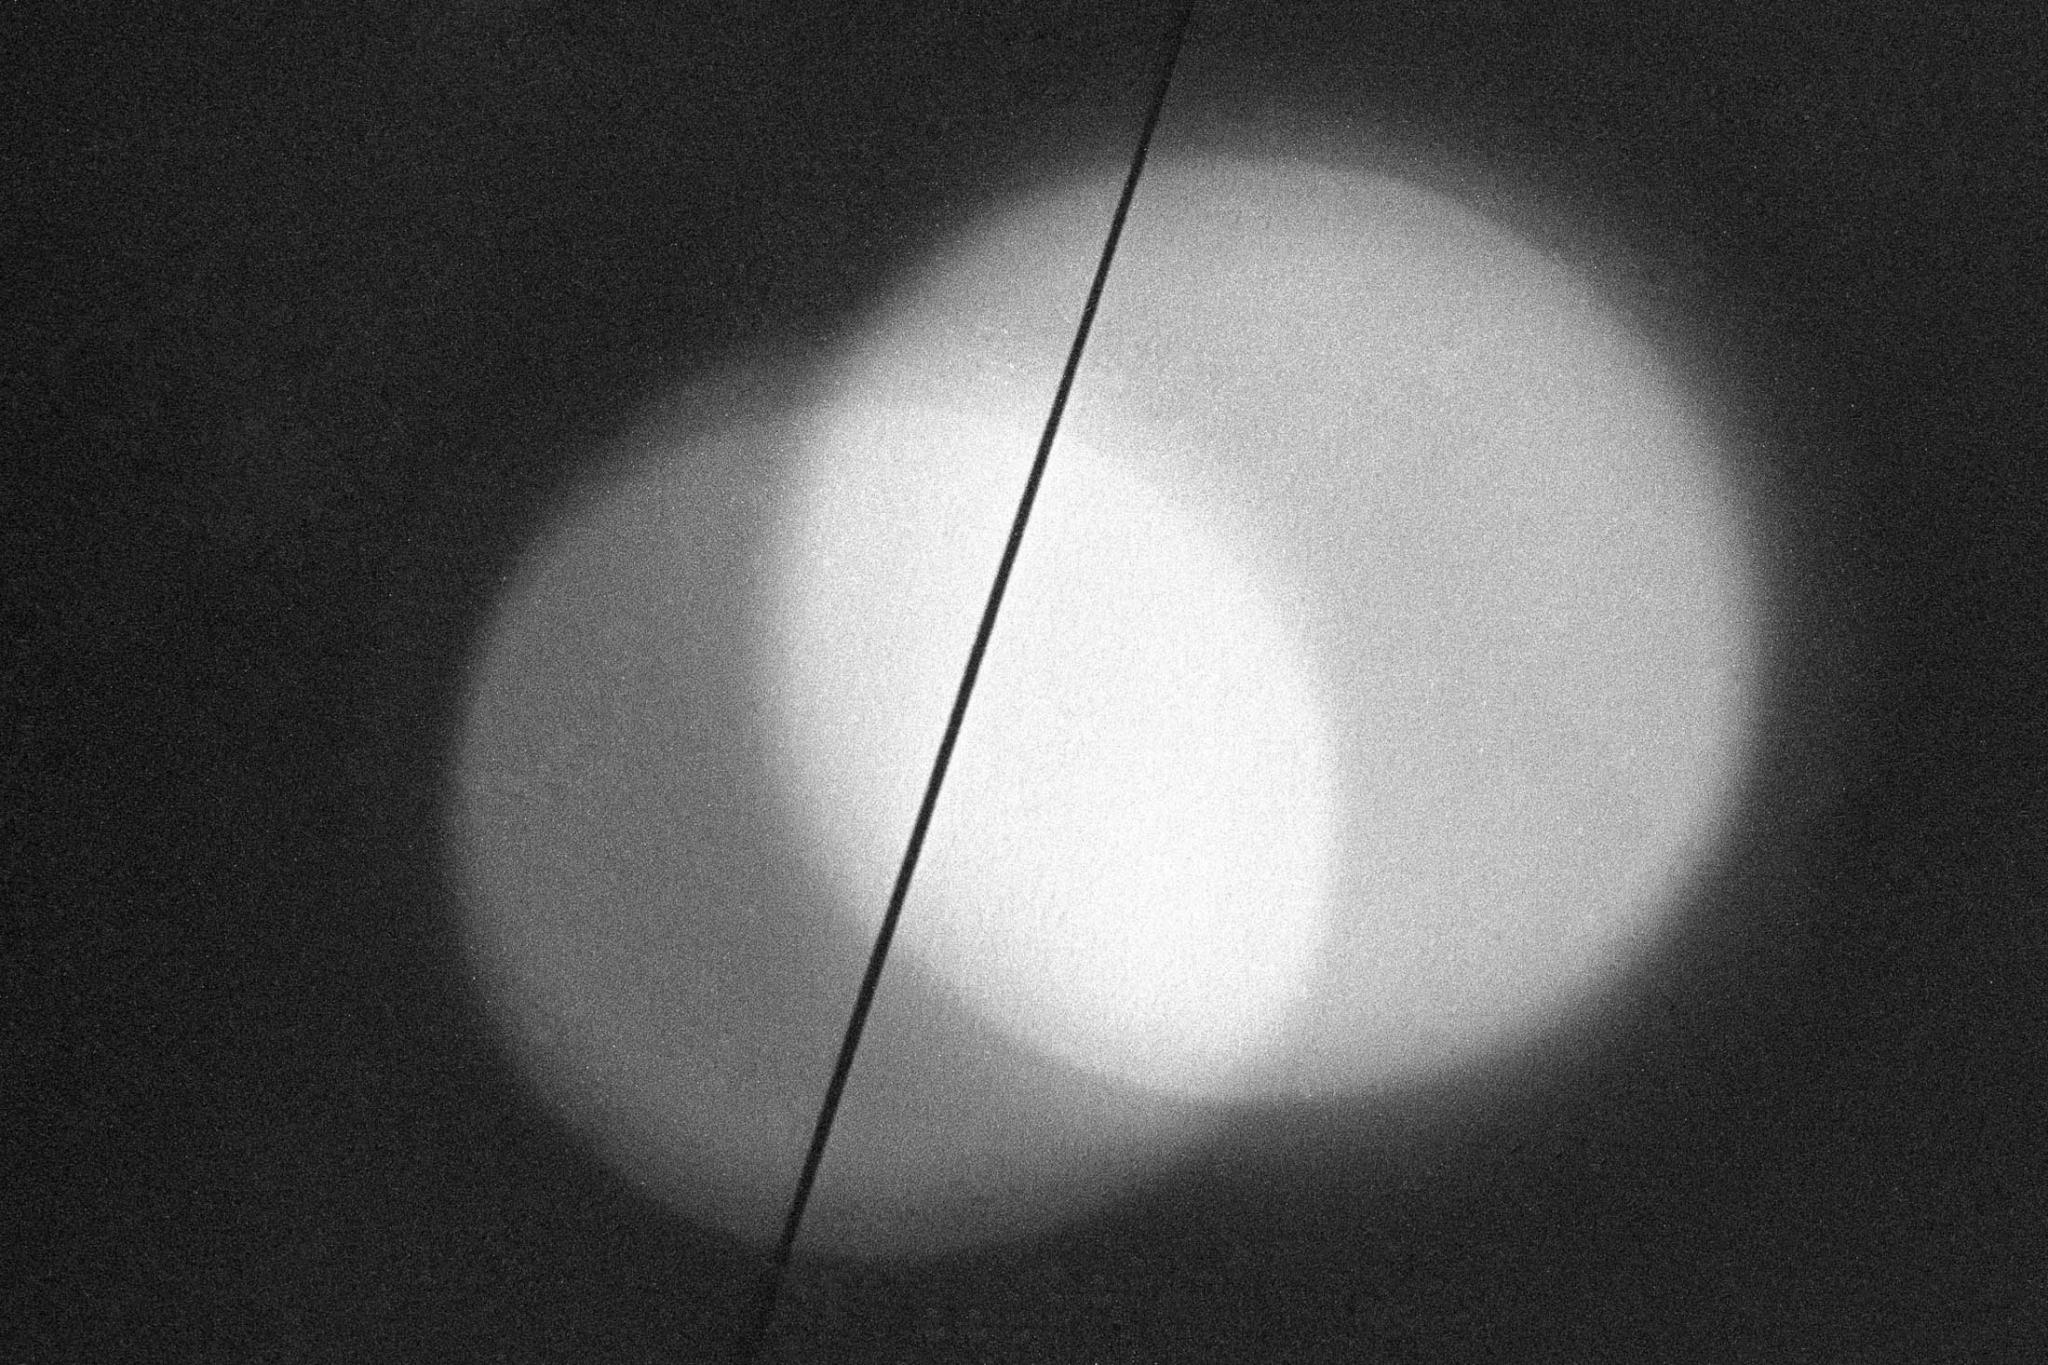 Photograph of circular light projection on wall